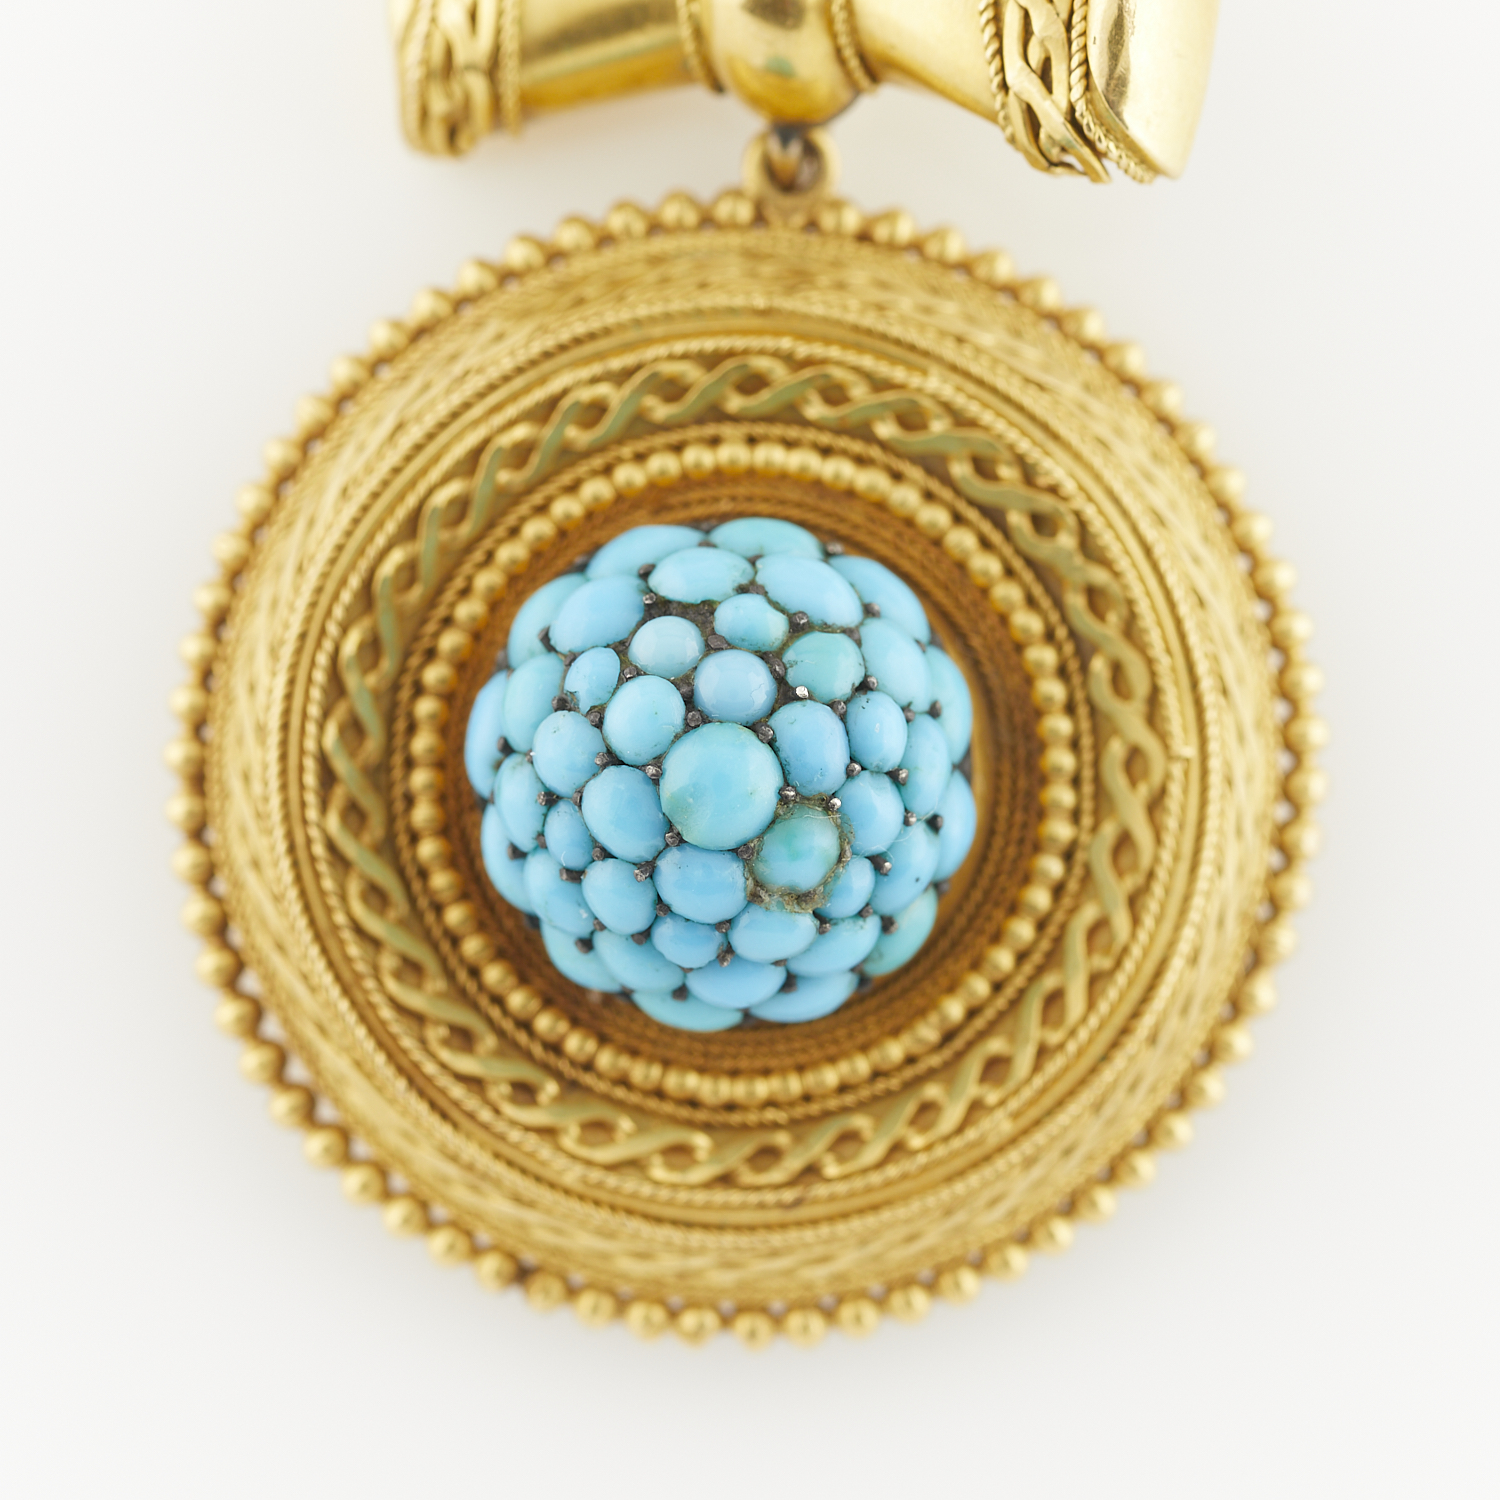 Etruscan Revival Gold & Turquoise Pendant - Image 6 of 8